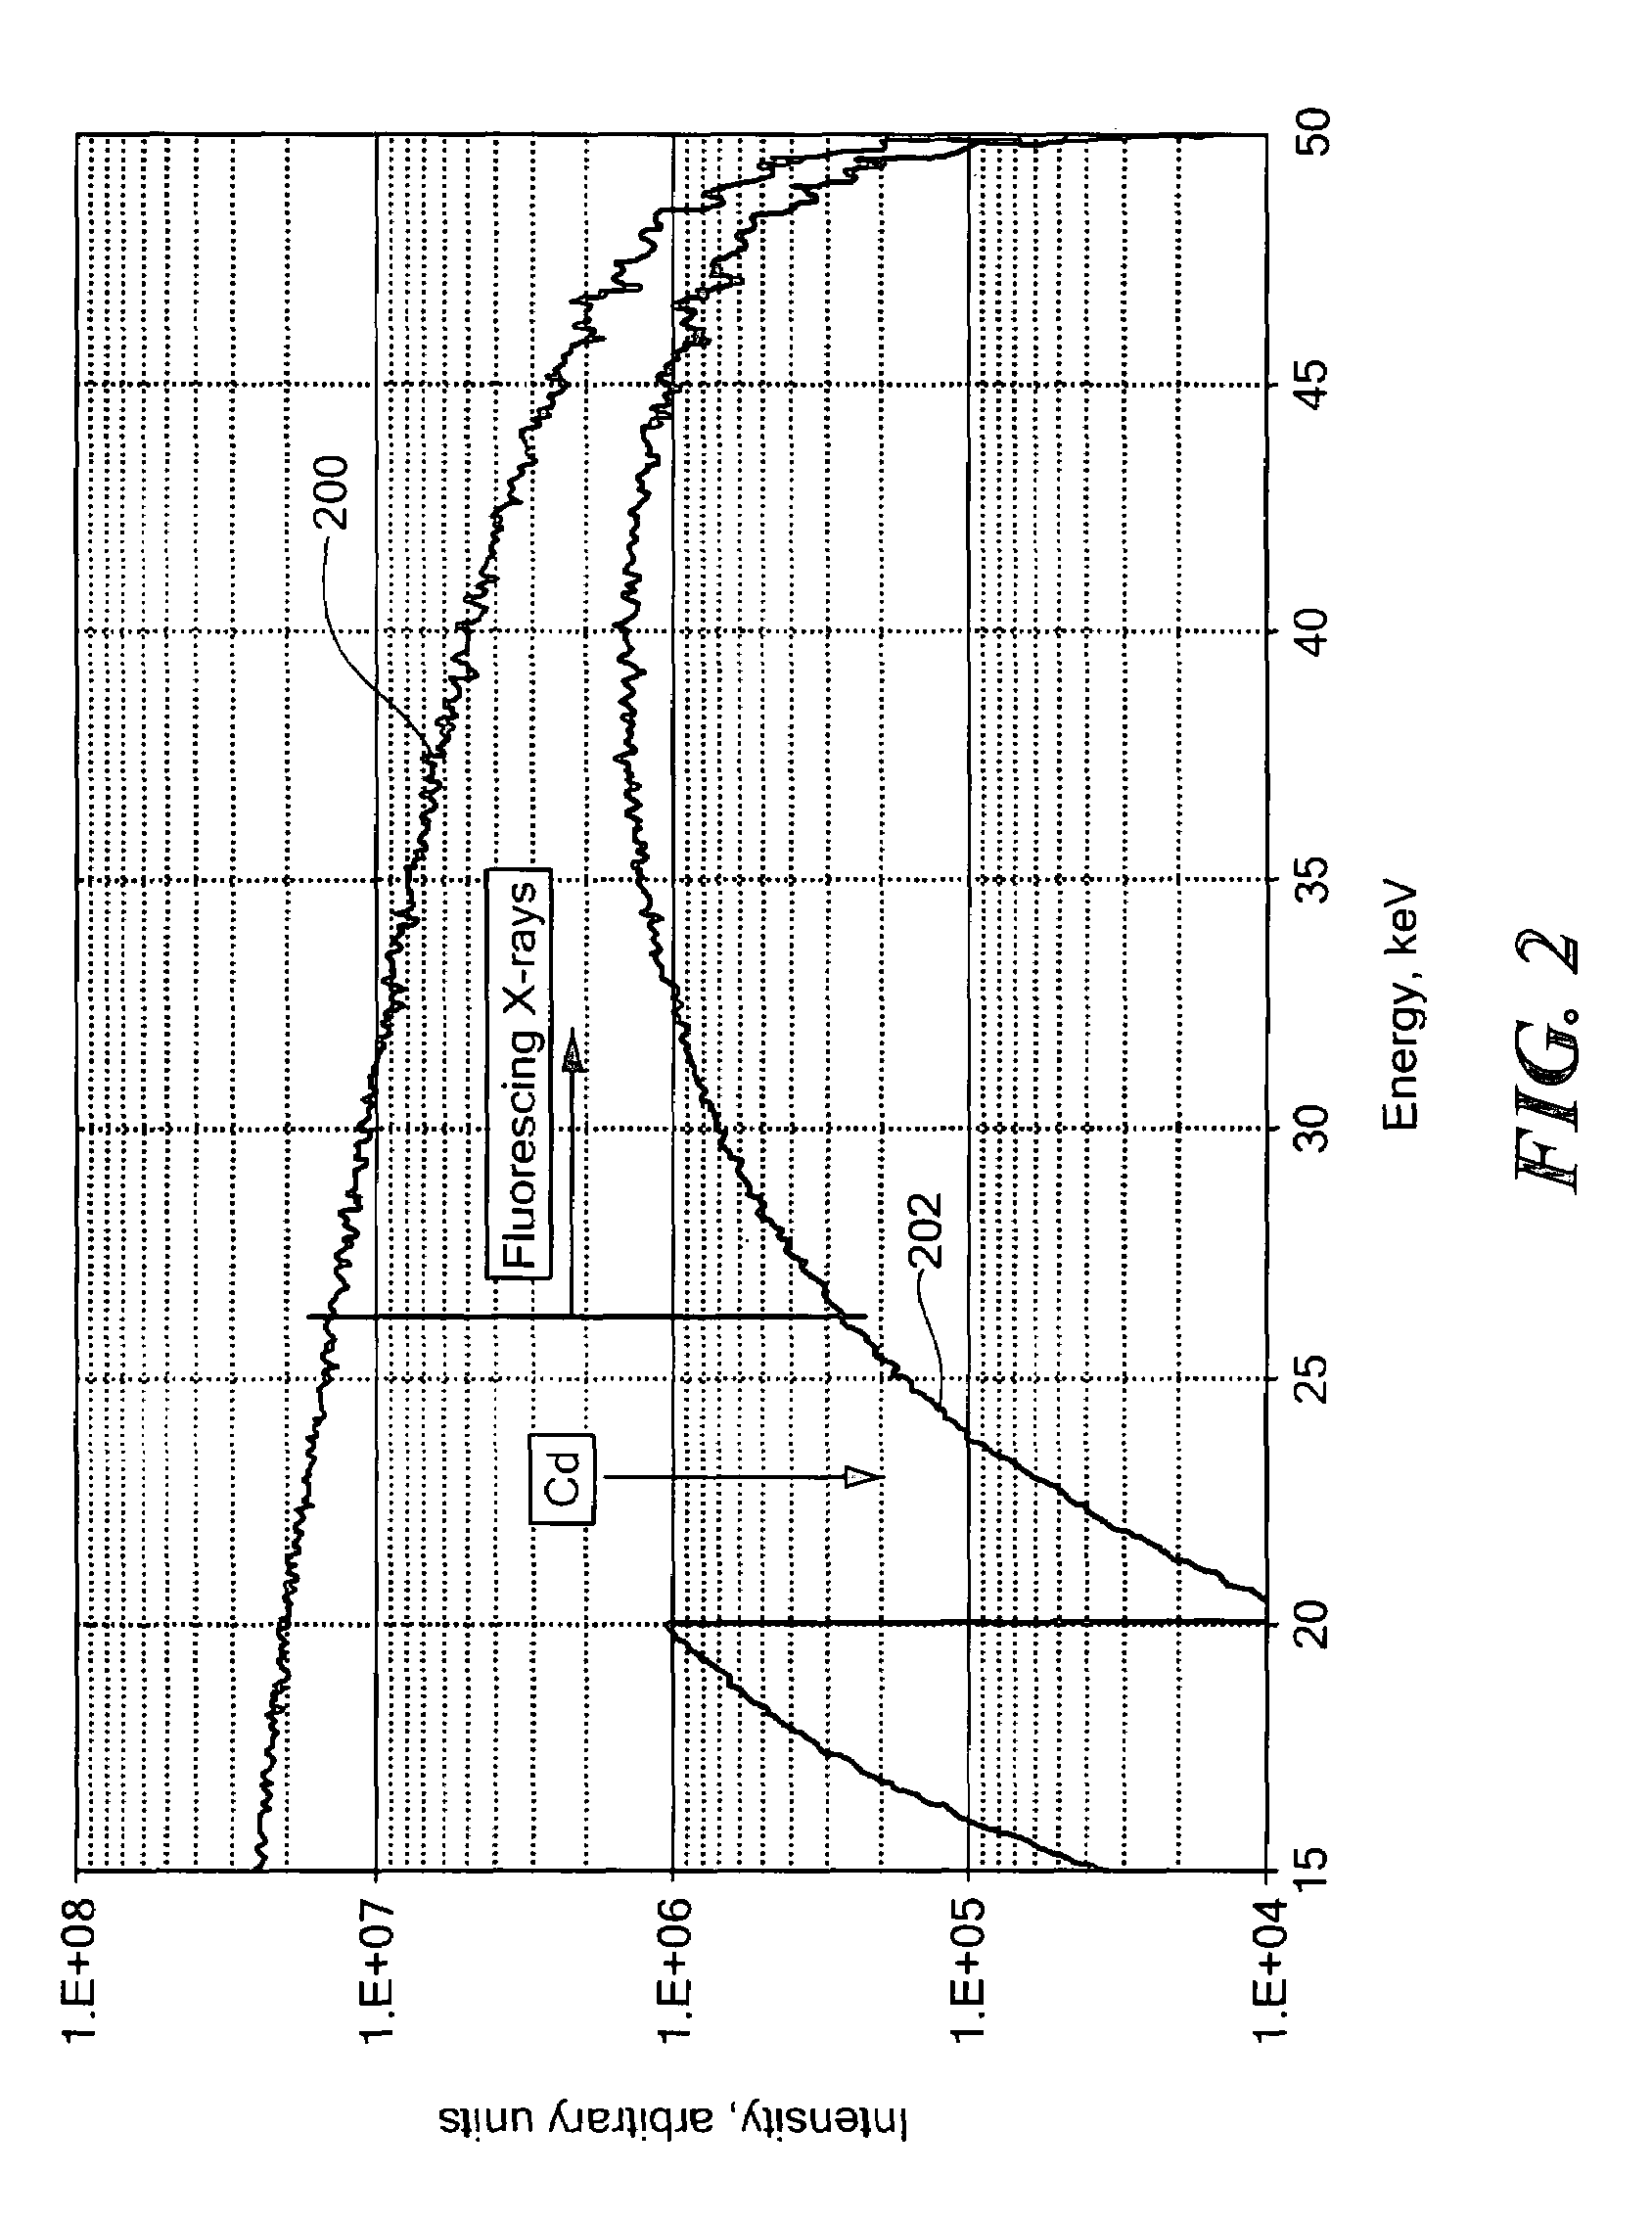 Two-stage x-ray concentrator